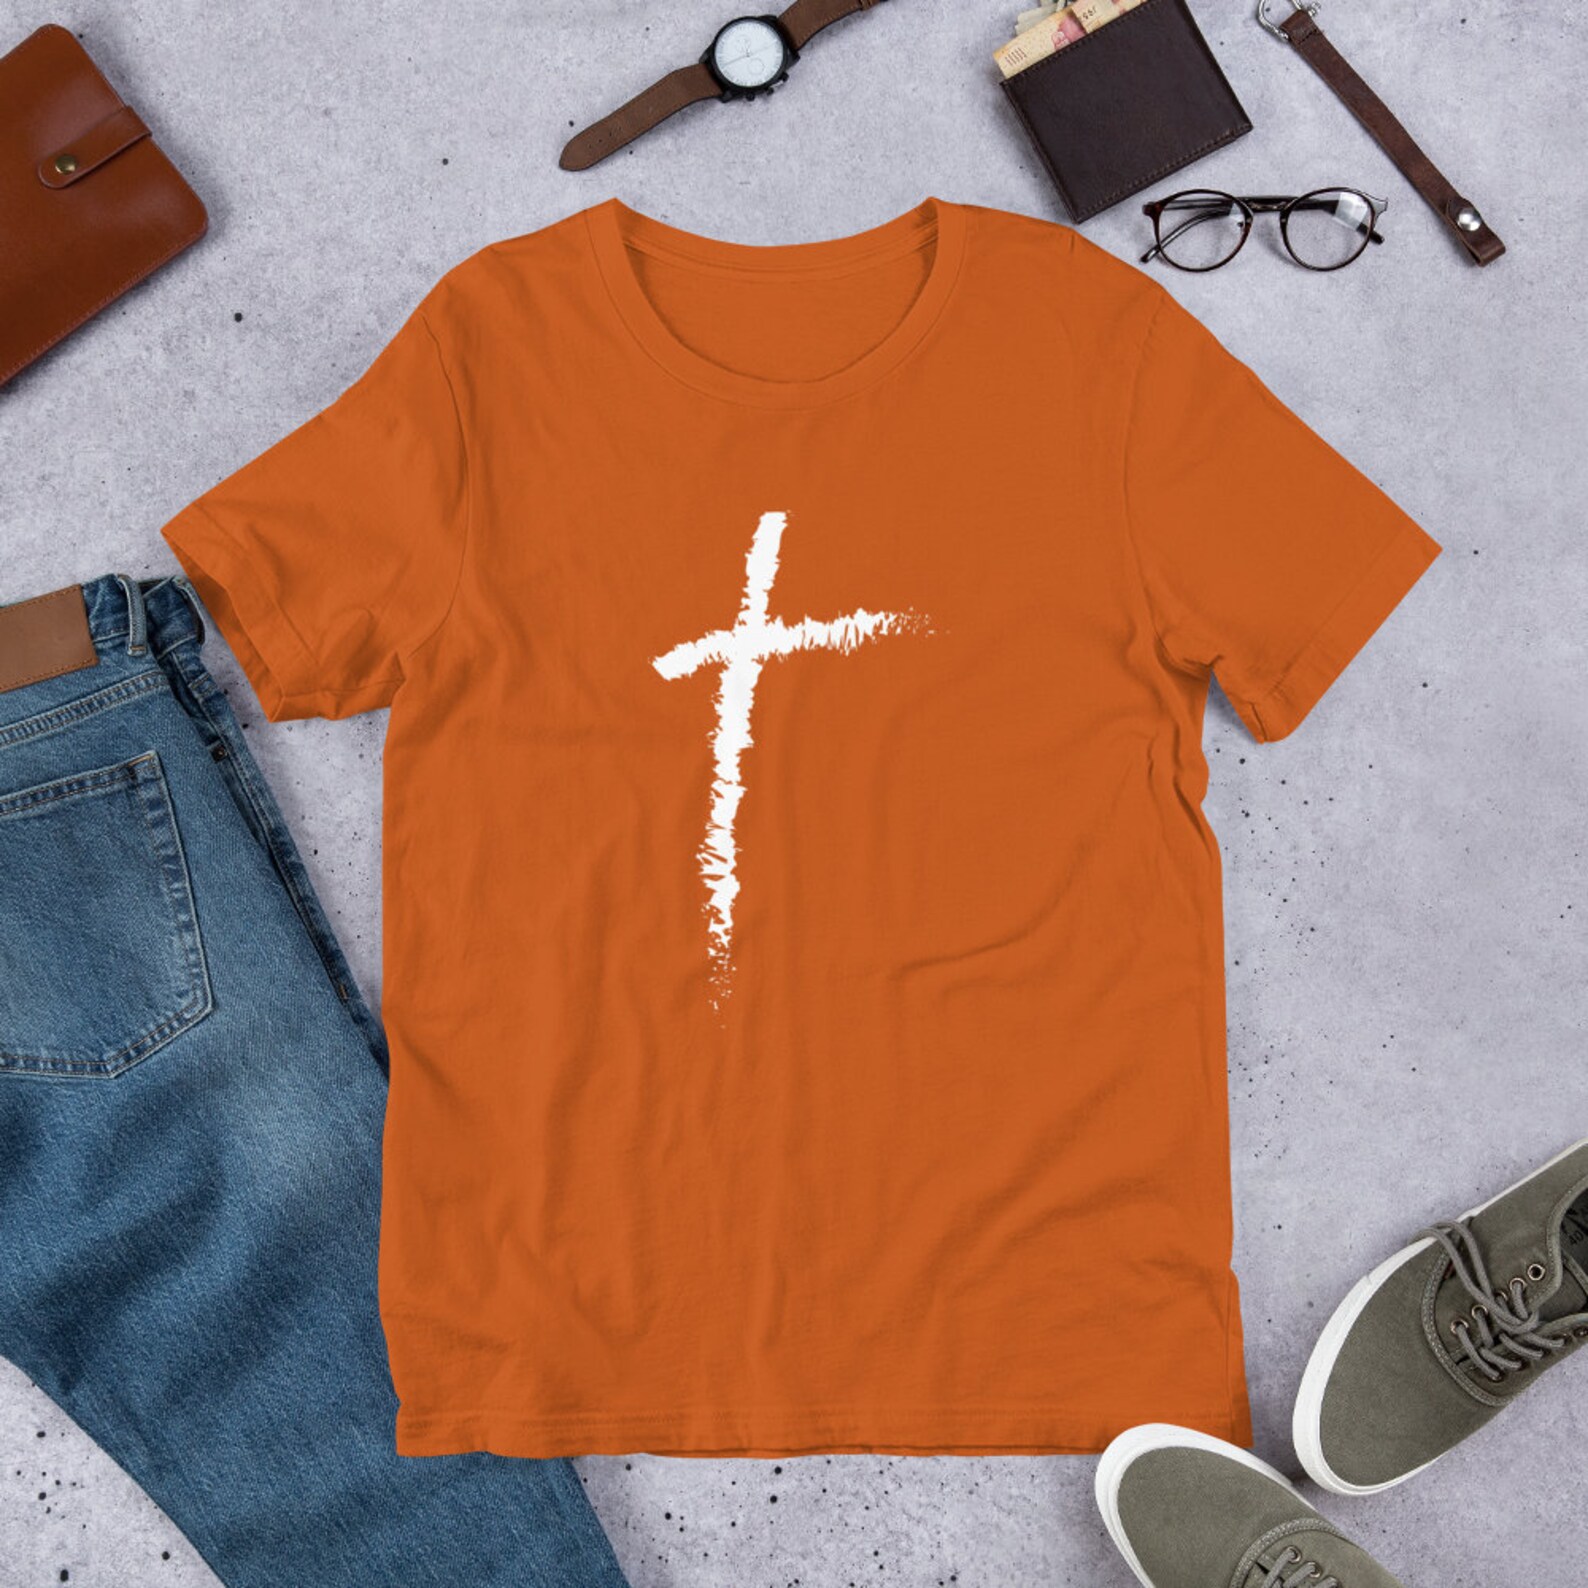 Christian Cross Shirts for Men & Women Clothing in Assorted | Etsy